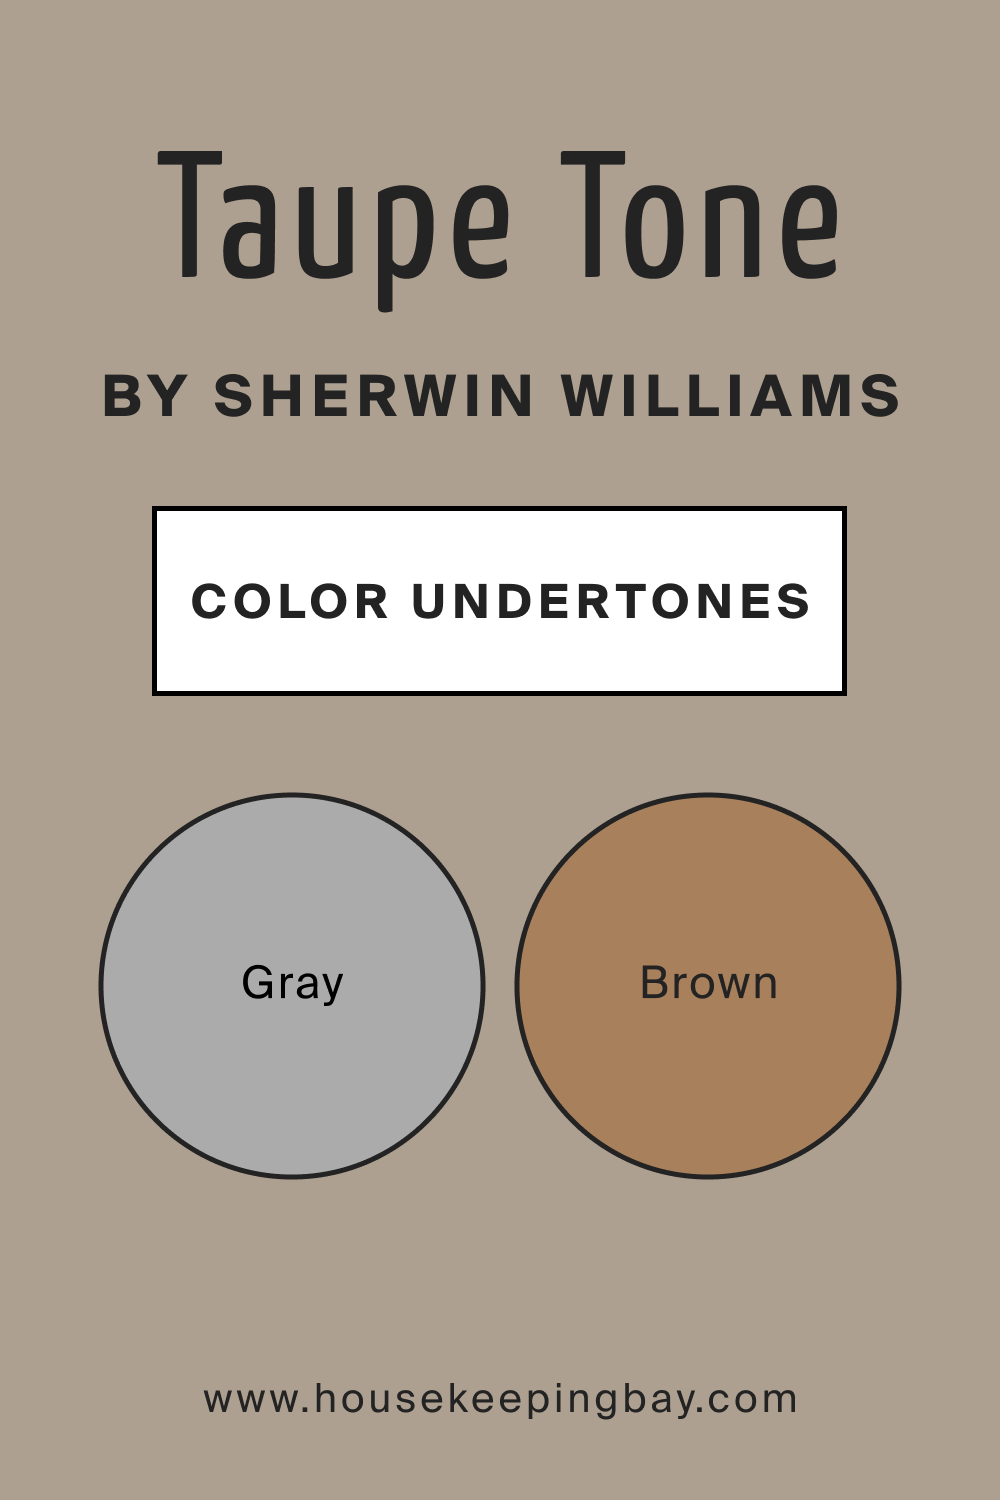 Taupe Tone SW 7633 by Sherwin Williams Color Undertones